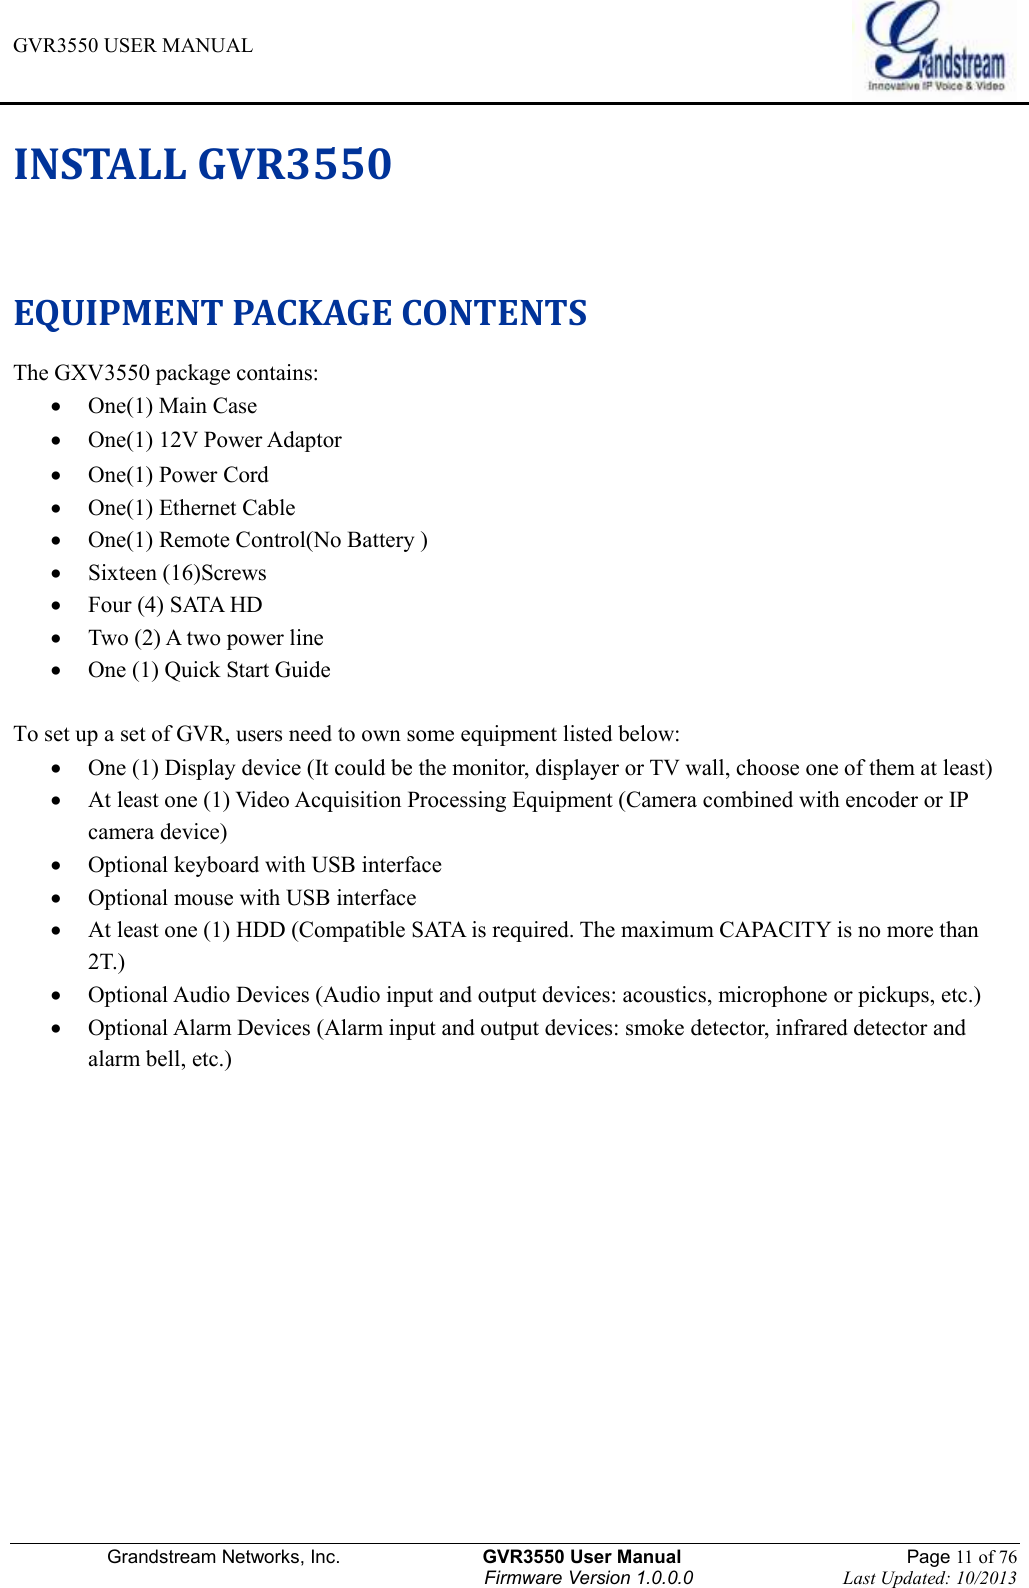 GVR3550 USER MANUAL   Grandstream Networks, Inc.                    GVR3550 User Manual                                                Page 11 of 76 Firmware Version 1.0.0.0                                Last Updated: 10/2013  INSTALL GVR3550   EQUIPMENT PACKAGE CONTENTS The GXV3550 package contains:  One(1) Main Case  One(1) 12V Power Adaptor    One(1) Power Cord  One(1) Ethernet Cable  One(1) Remote Control(No Battery )  Sixteen (16)Screws  Four (4) SATA HD  Two (2) A two power line  One (1) Quick Start Guide  To set up a set of GVR, users need to own some equipment listed below:  One (1) Display device (It could be the monitor, displayer or TV wall, choose one of them at least)  At least one (1) Video Acquisition Processing Equipment (Camera combined with encoder or IP camera device)  Optional keyboard with USB interface  Optional mouse with USB interface  At least one (1) HDD (Compatible SATA is required. The maximum CAPACITY is no more than 2T.)  Optional Audio Devices (Audio input and output devices: acoustics, microphone or pickups, etc.)  Optional Alarm Devices (Alarm input and output devices: smoke detector, infrared detector and alarm bell, etc.)  